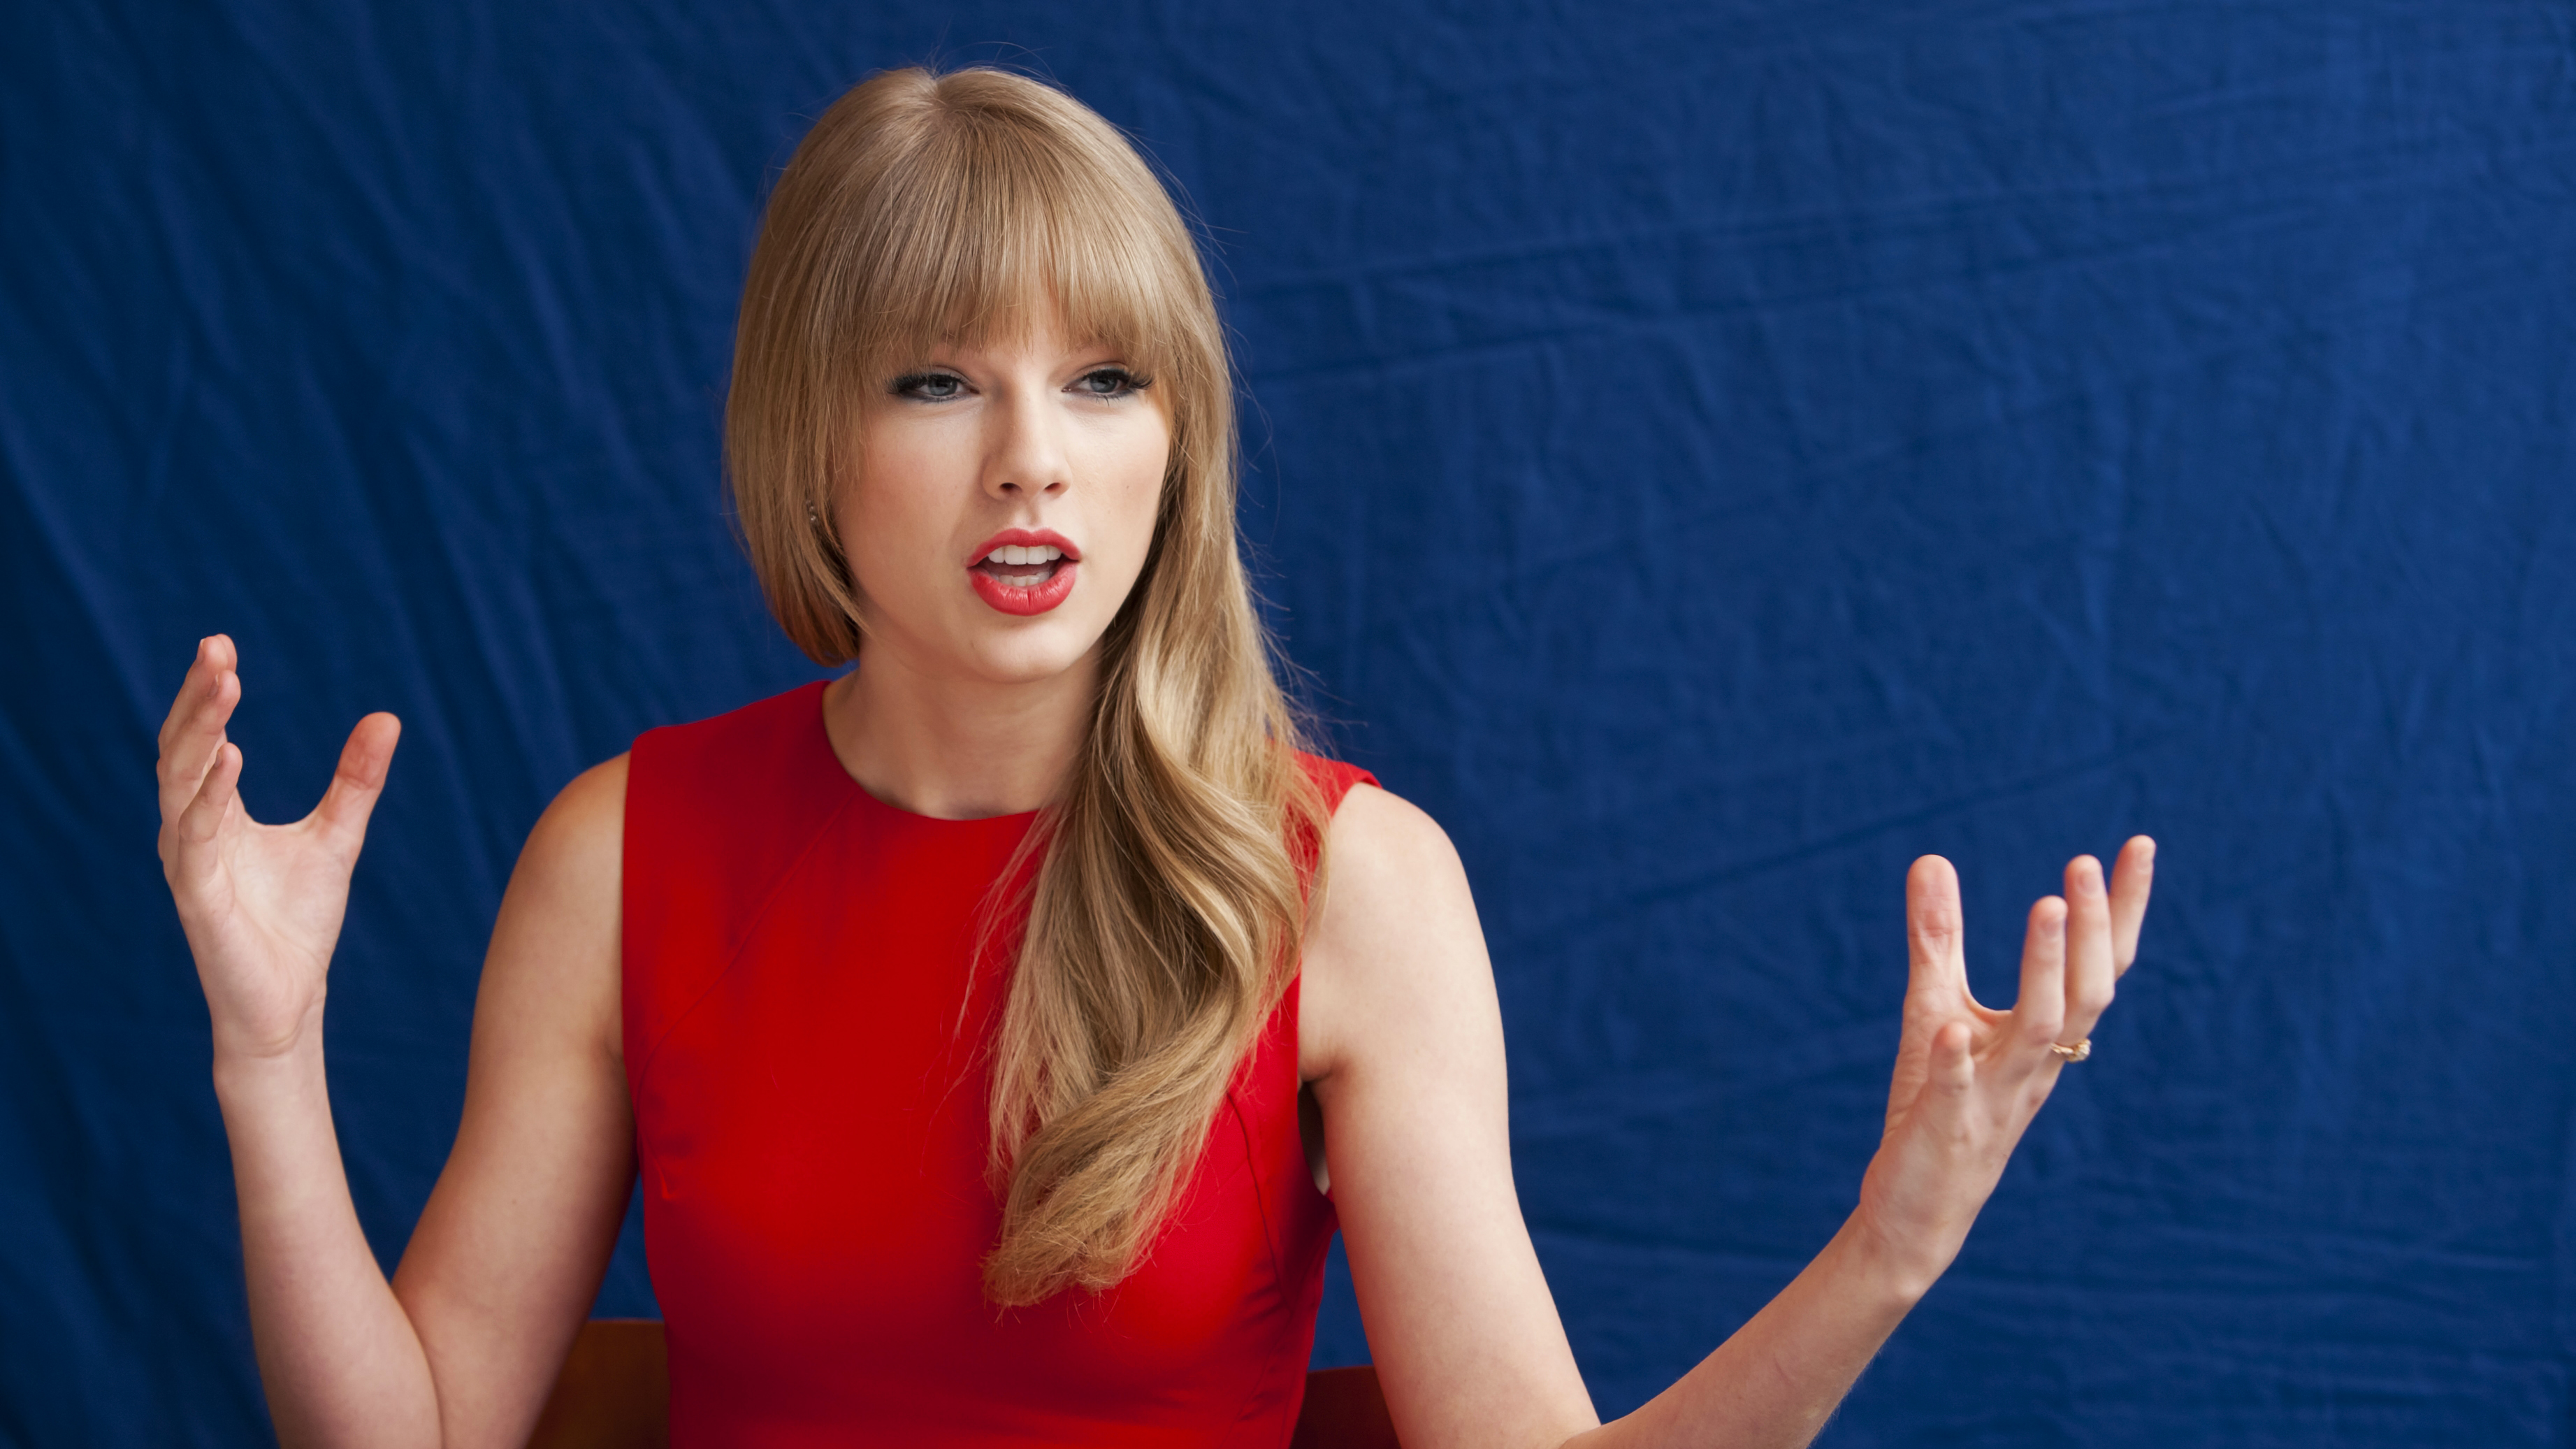 Taylor Swift Singer Women Blonde Arms Up Open Mouth Fringe Hair.